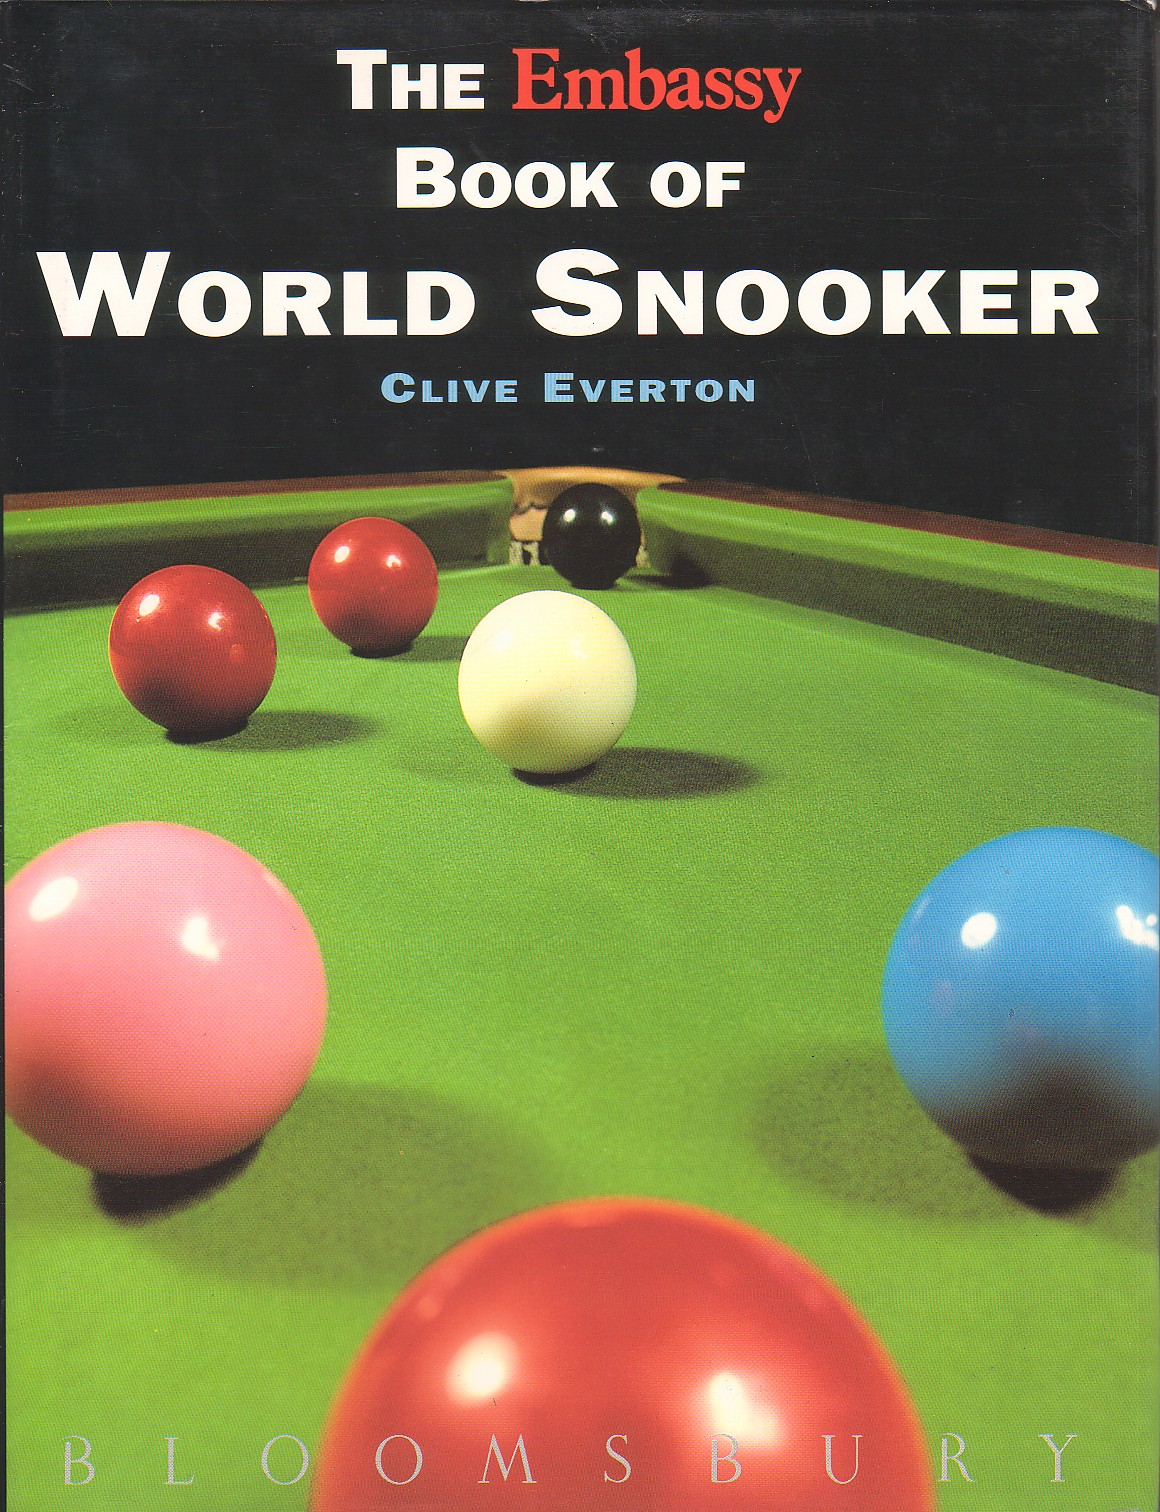 The Embassy Book of World Snooker